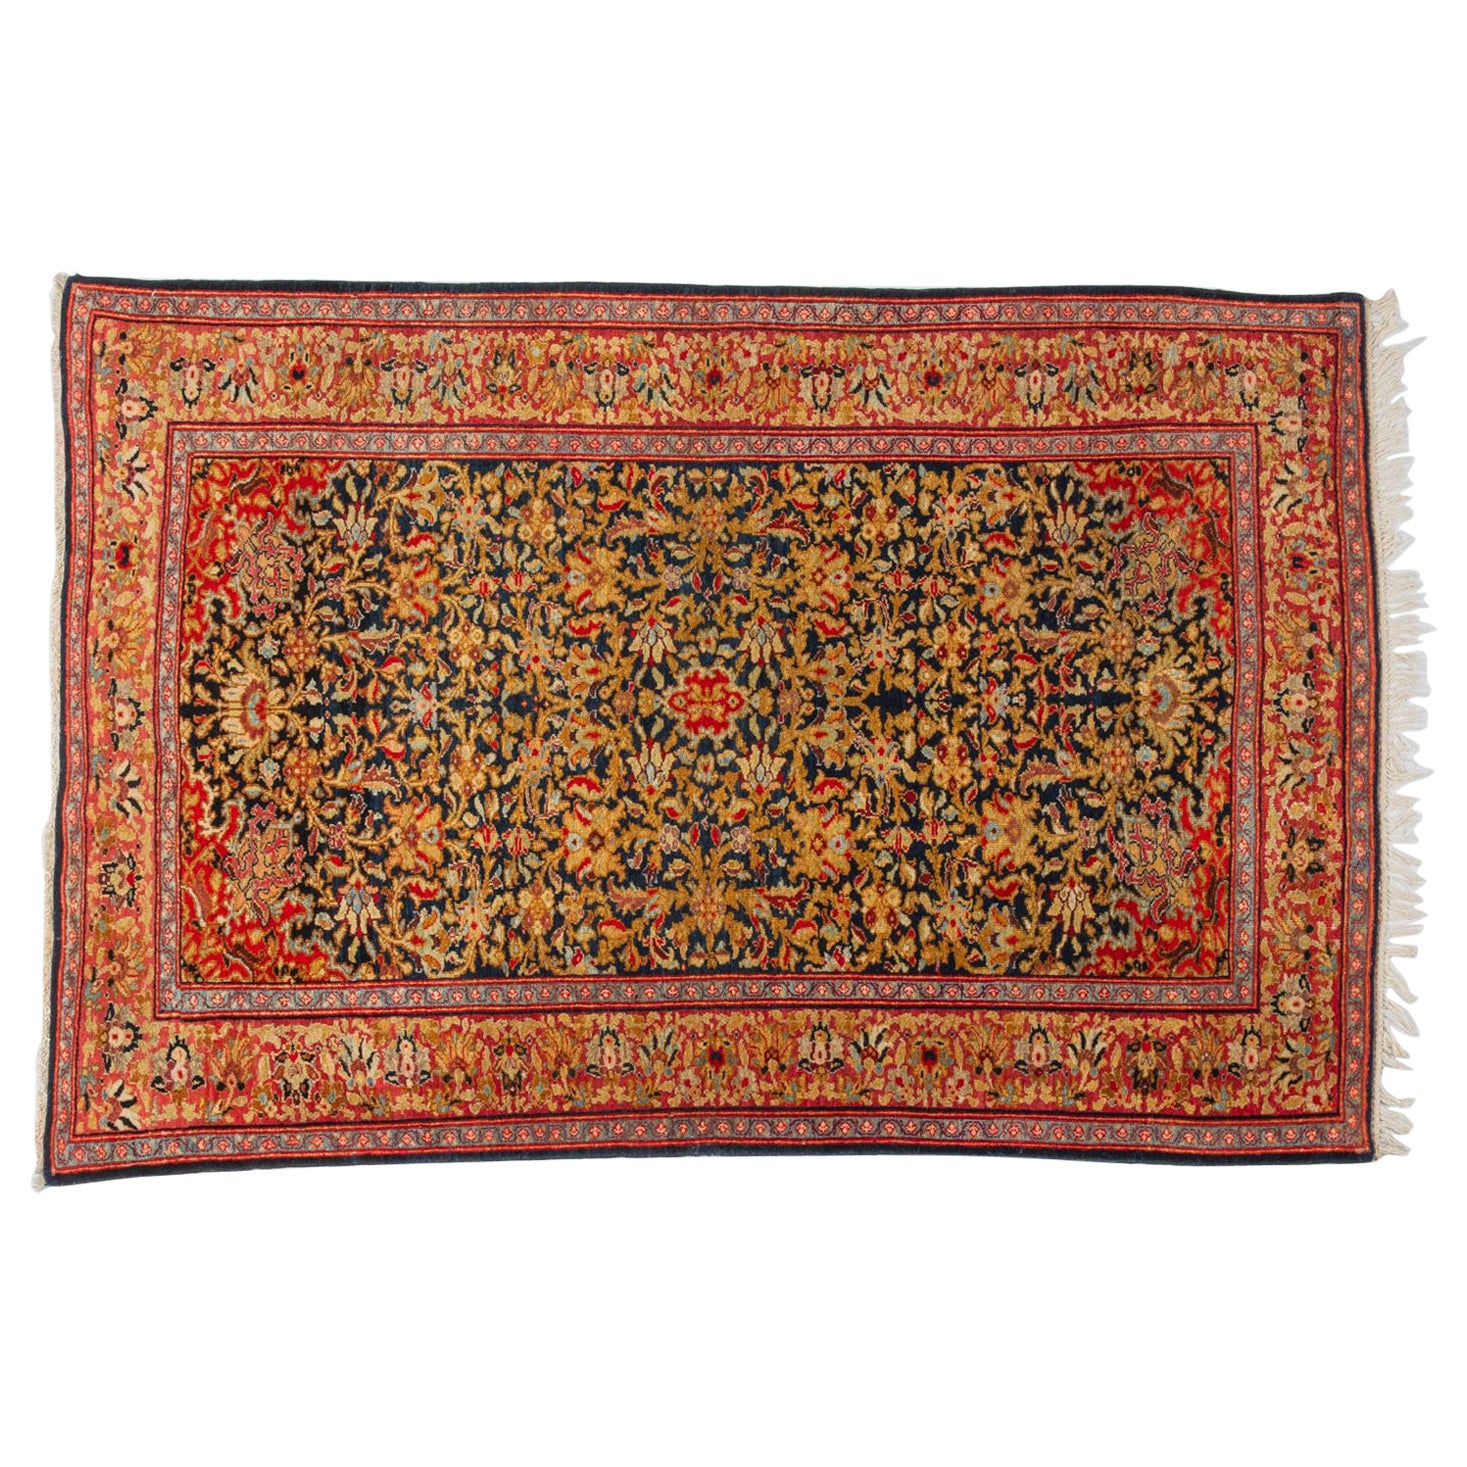 Agra Little Carpet Extremely Fine